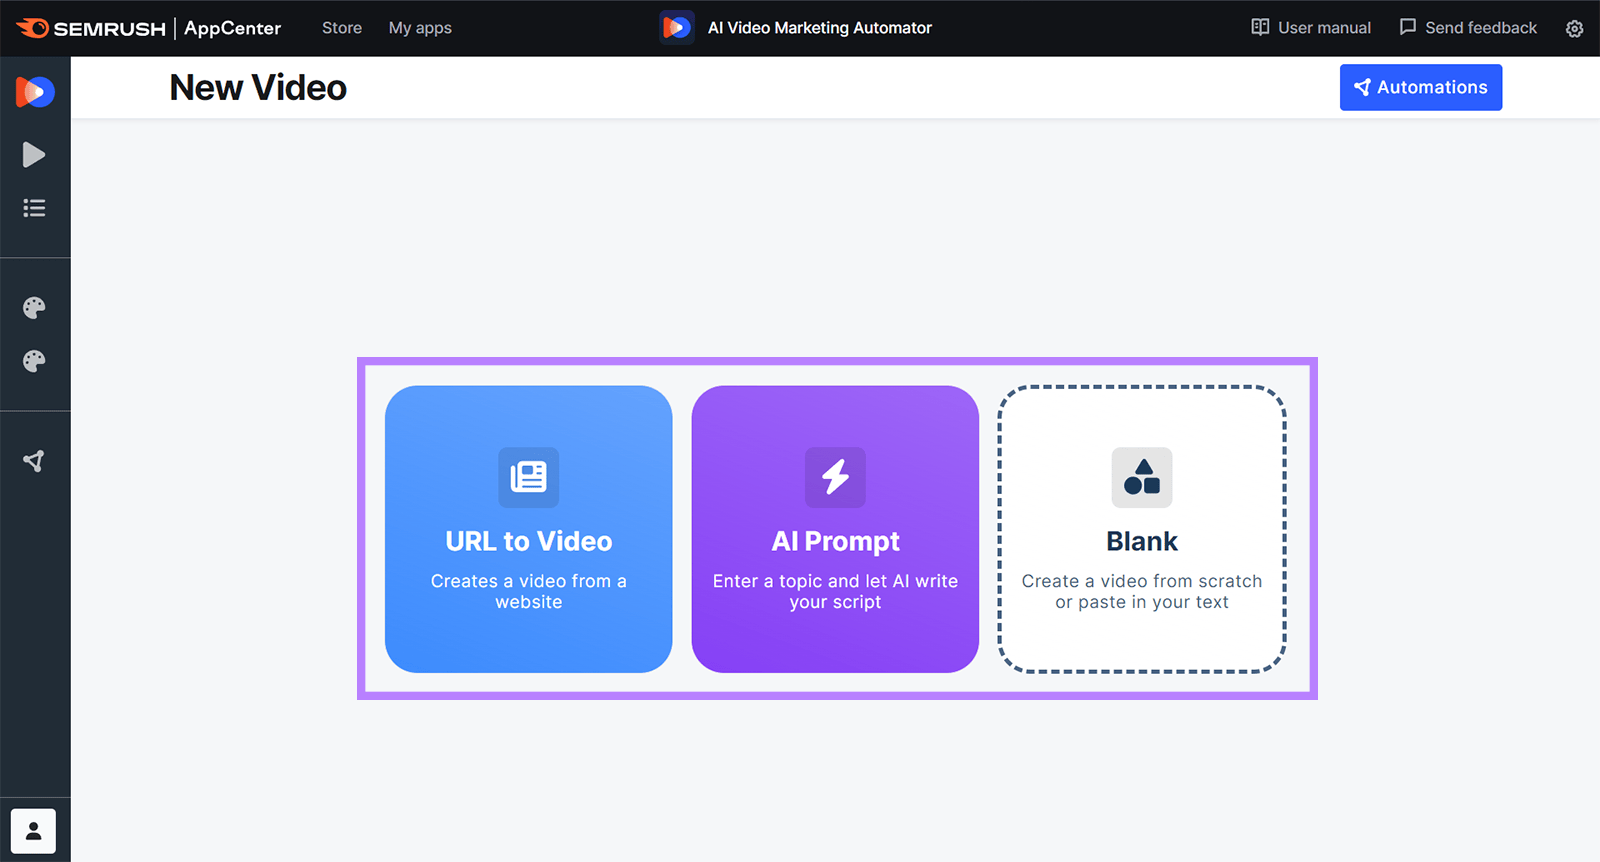 Semrush AI Video Marketing Automator app home page with three start options highlighted.